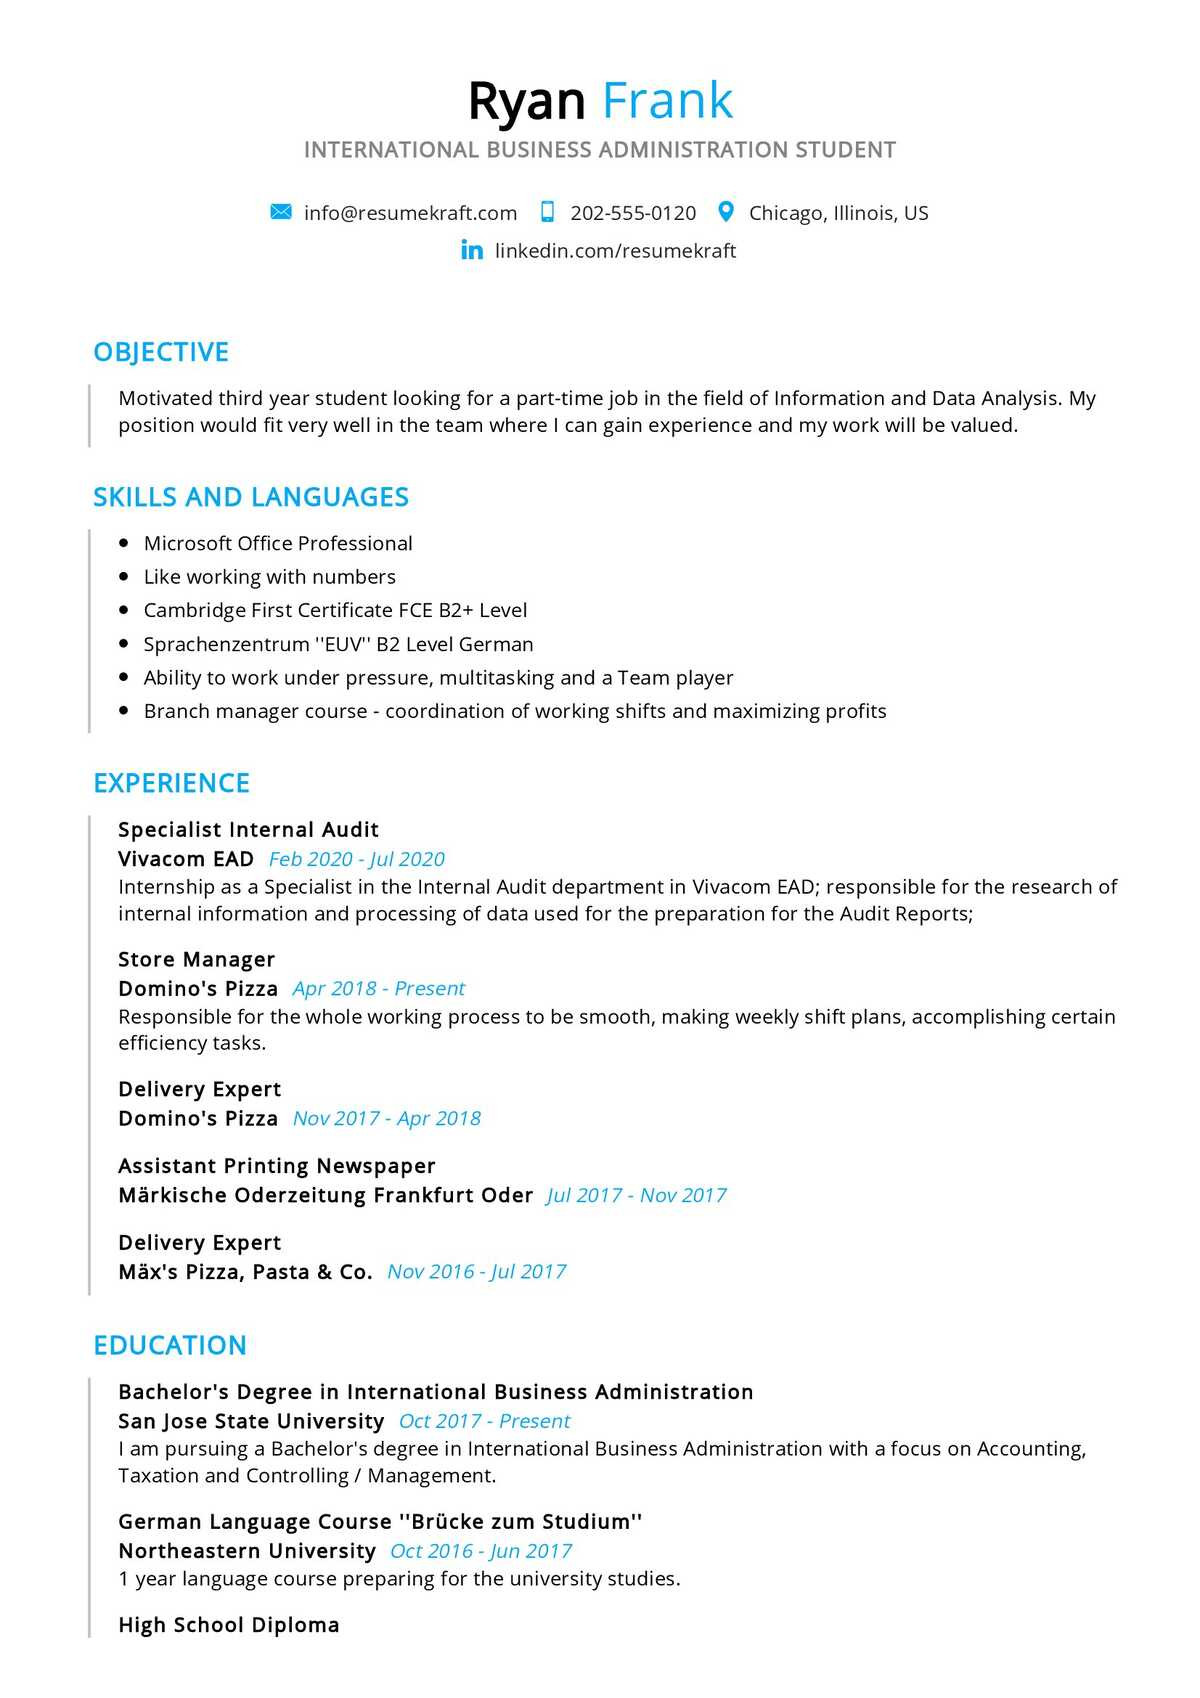 Sample Resume for Business Administration Student Business Student Resume Sample 2021 Writing Tips – Resumekraft